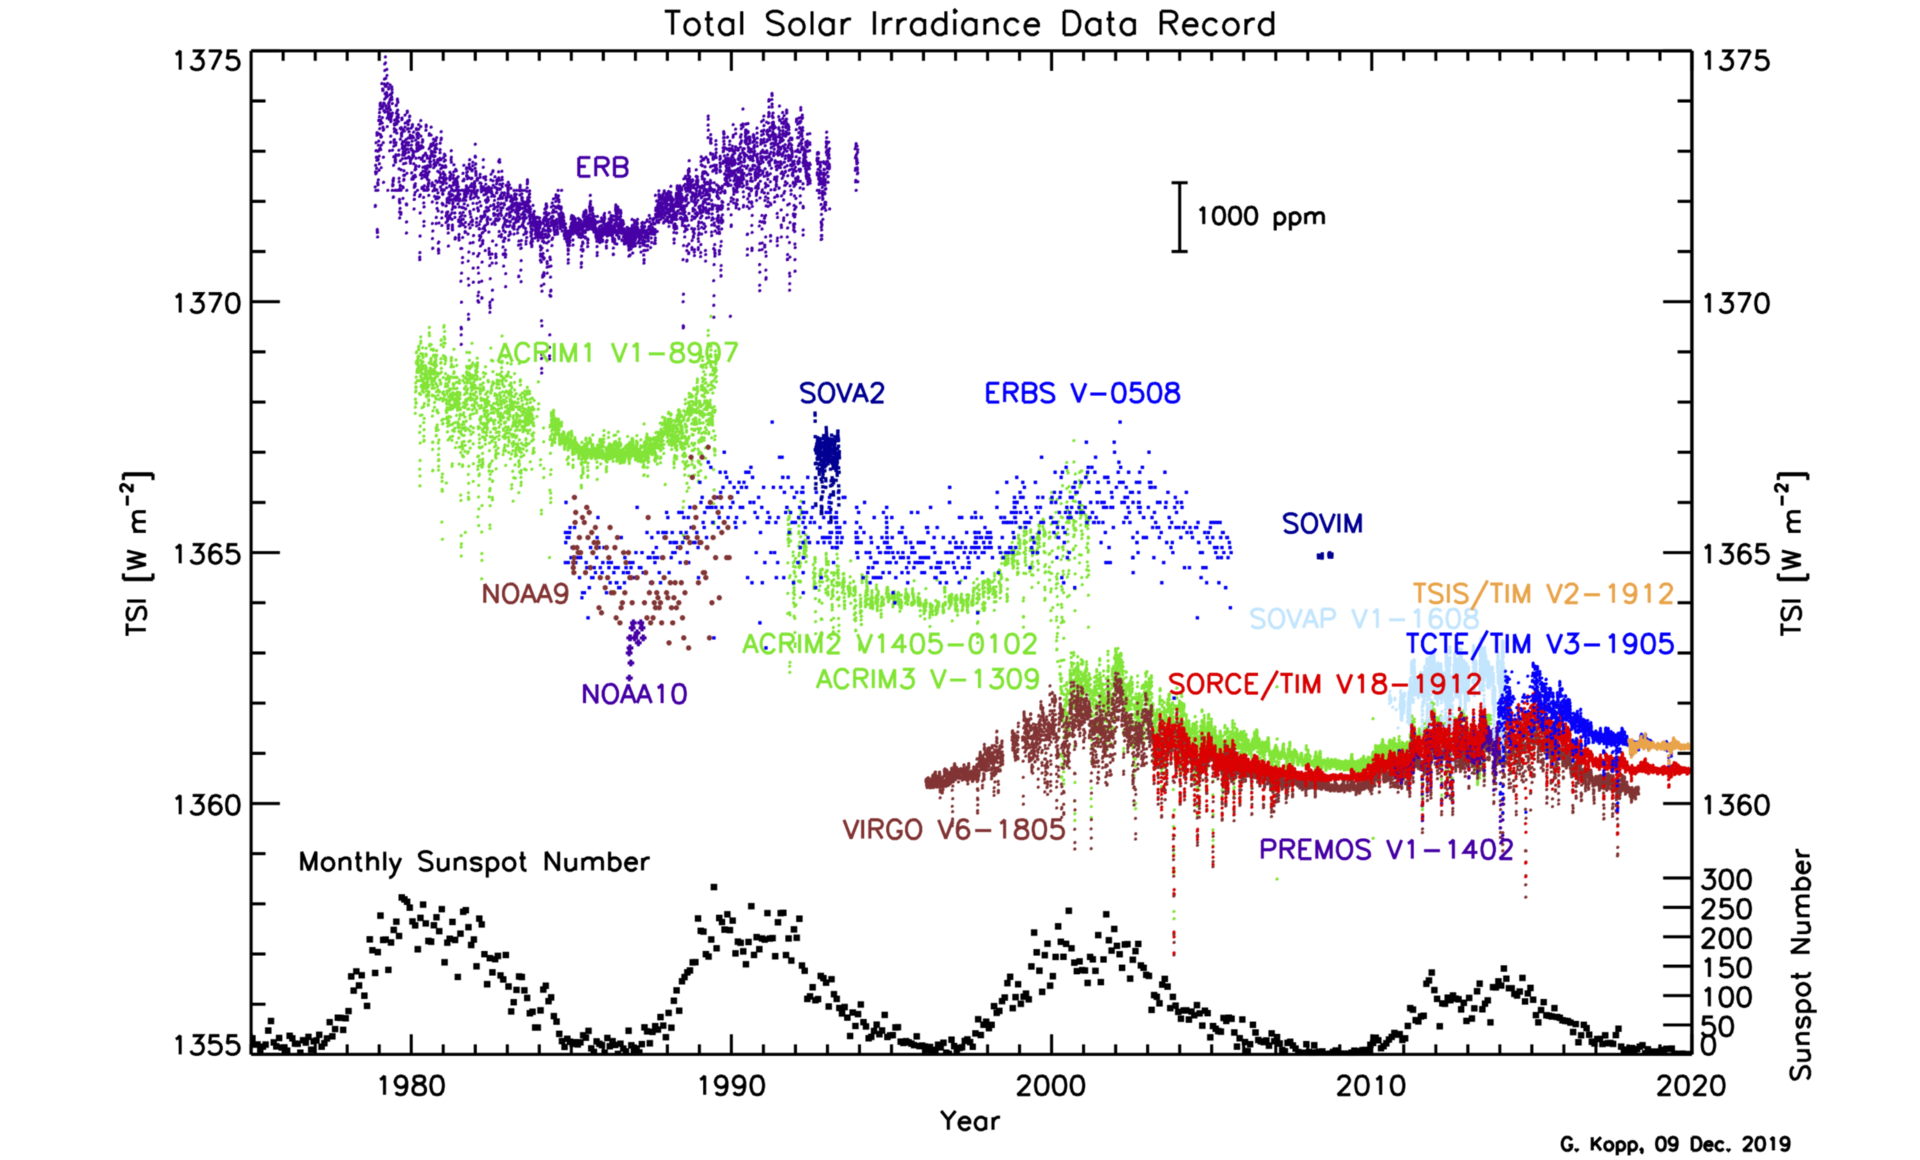 graph showing the total solar irradiance during years of time.